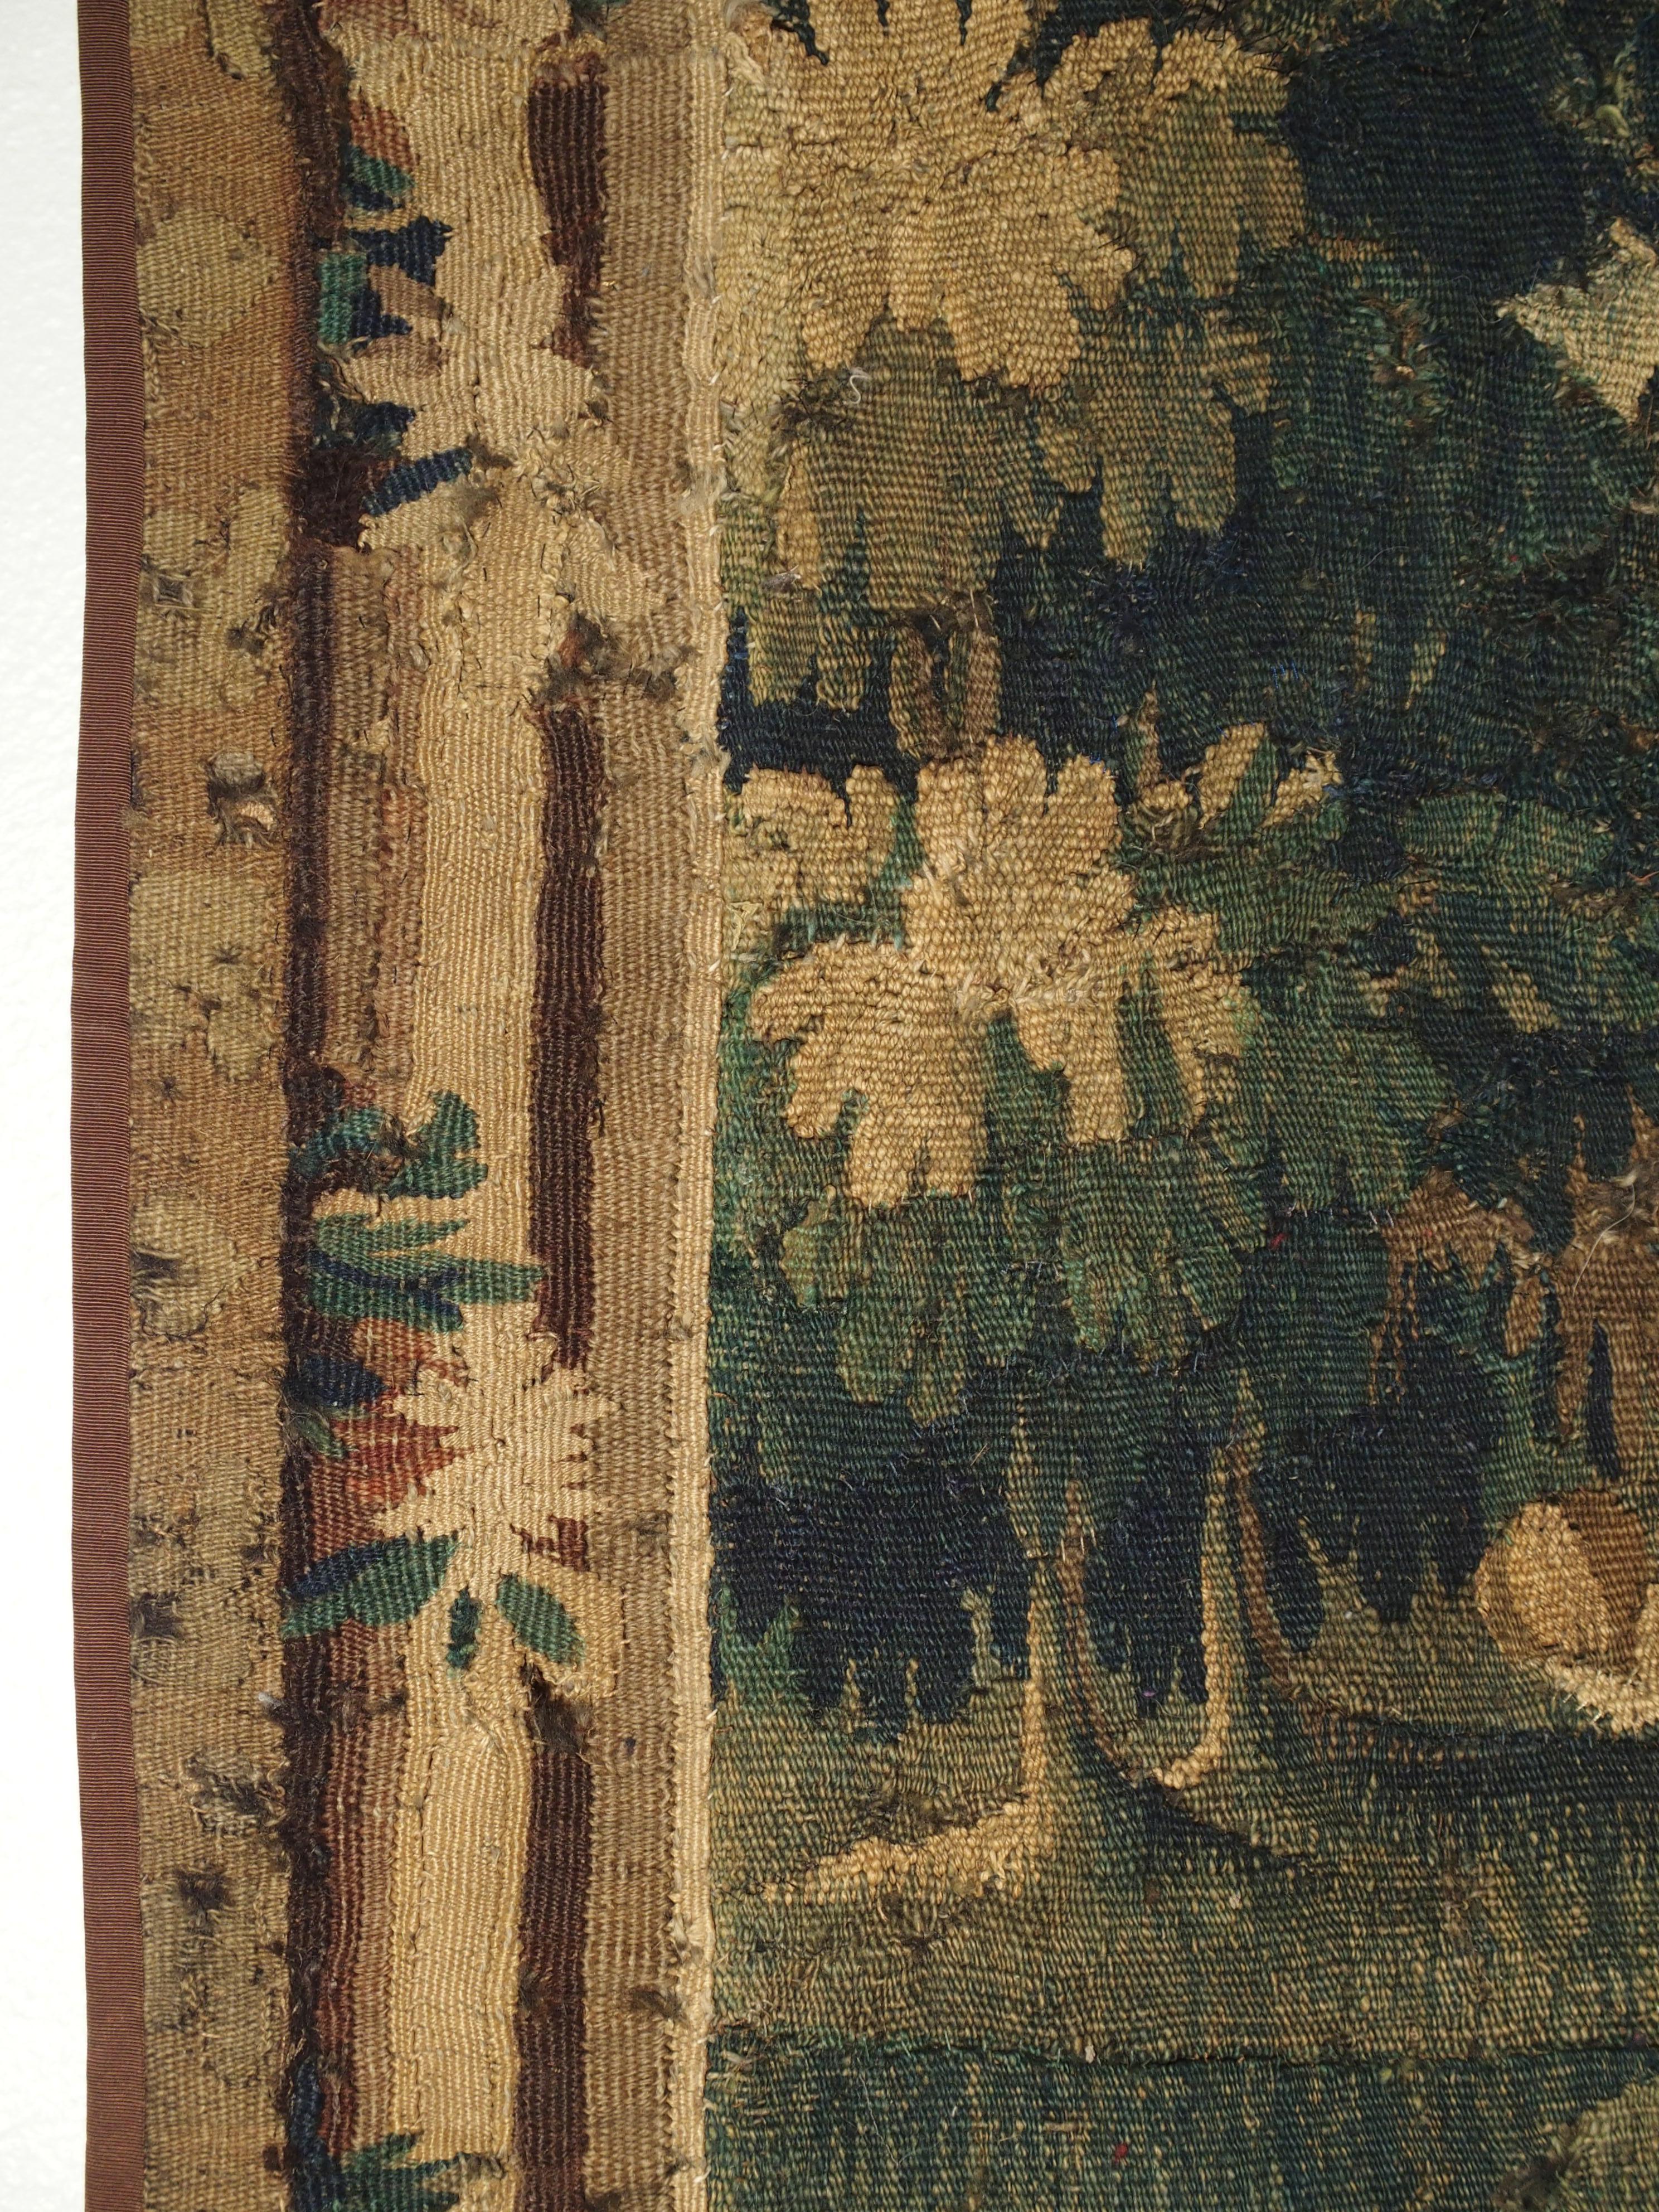 From northern France, this verdure tapestry fragment is in the shape of a portiere and dates to the 1600s. It would have covered a doorway from one room to the other. Tapestries were used in chateaux for their beauty as well as for warmth. This